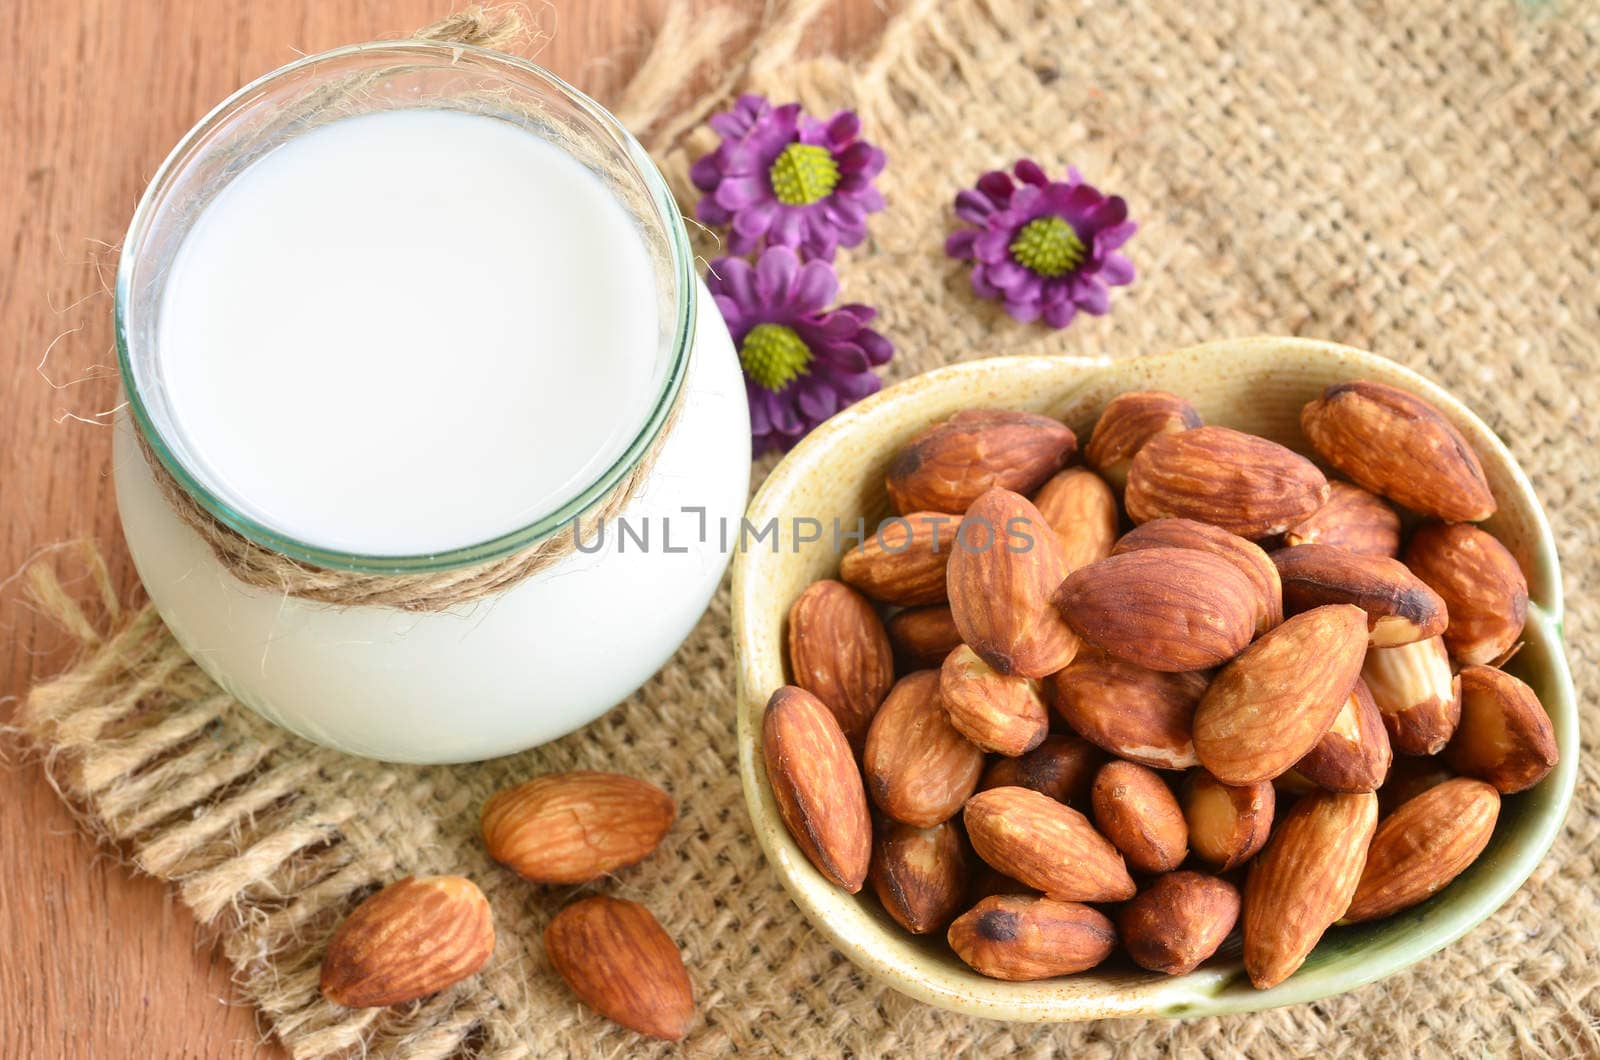 Glass of almond milk with almonds on wooden background.